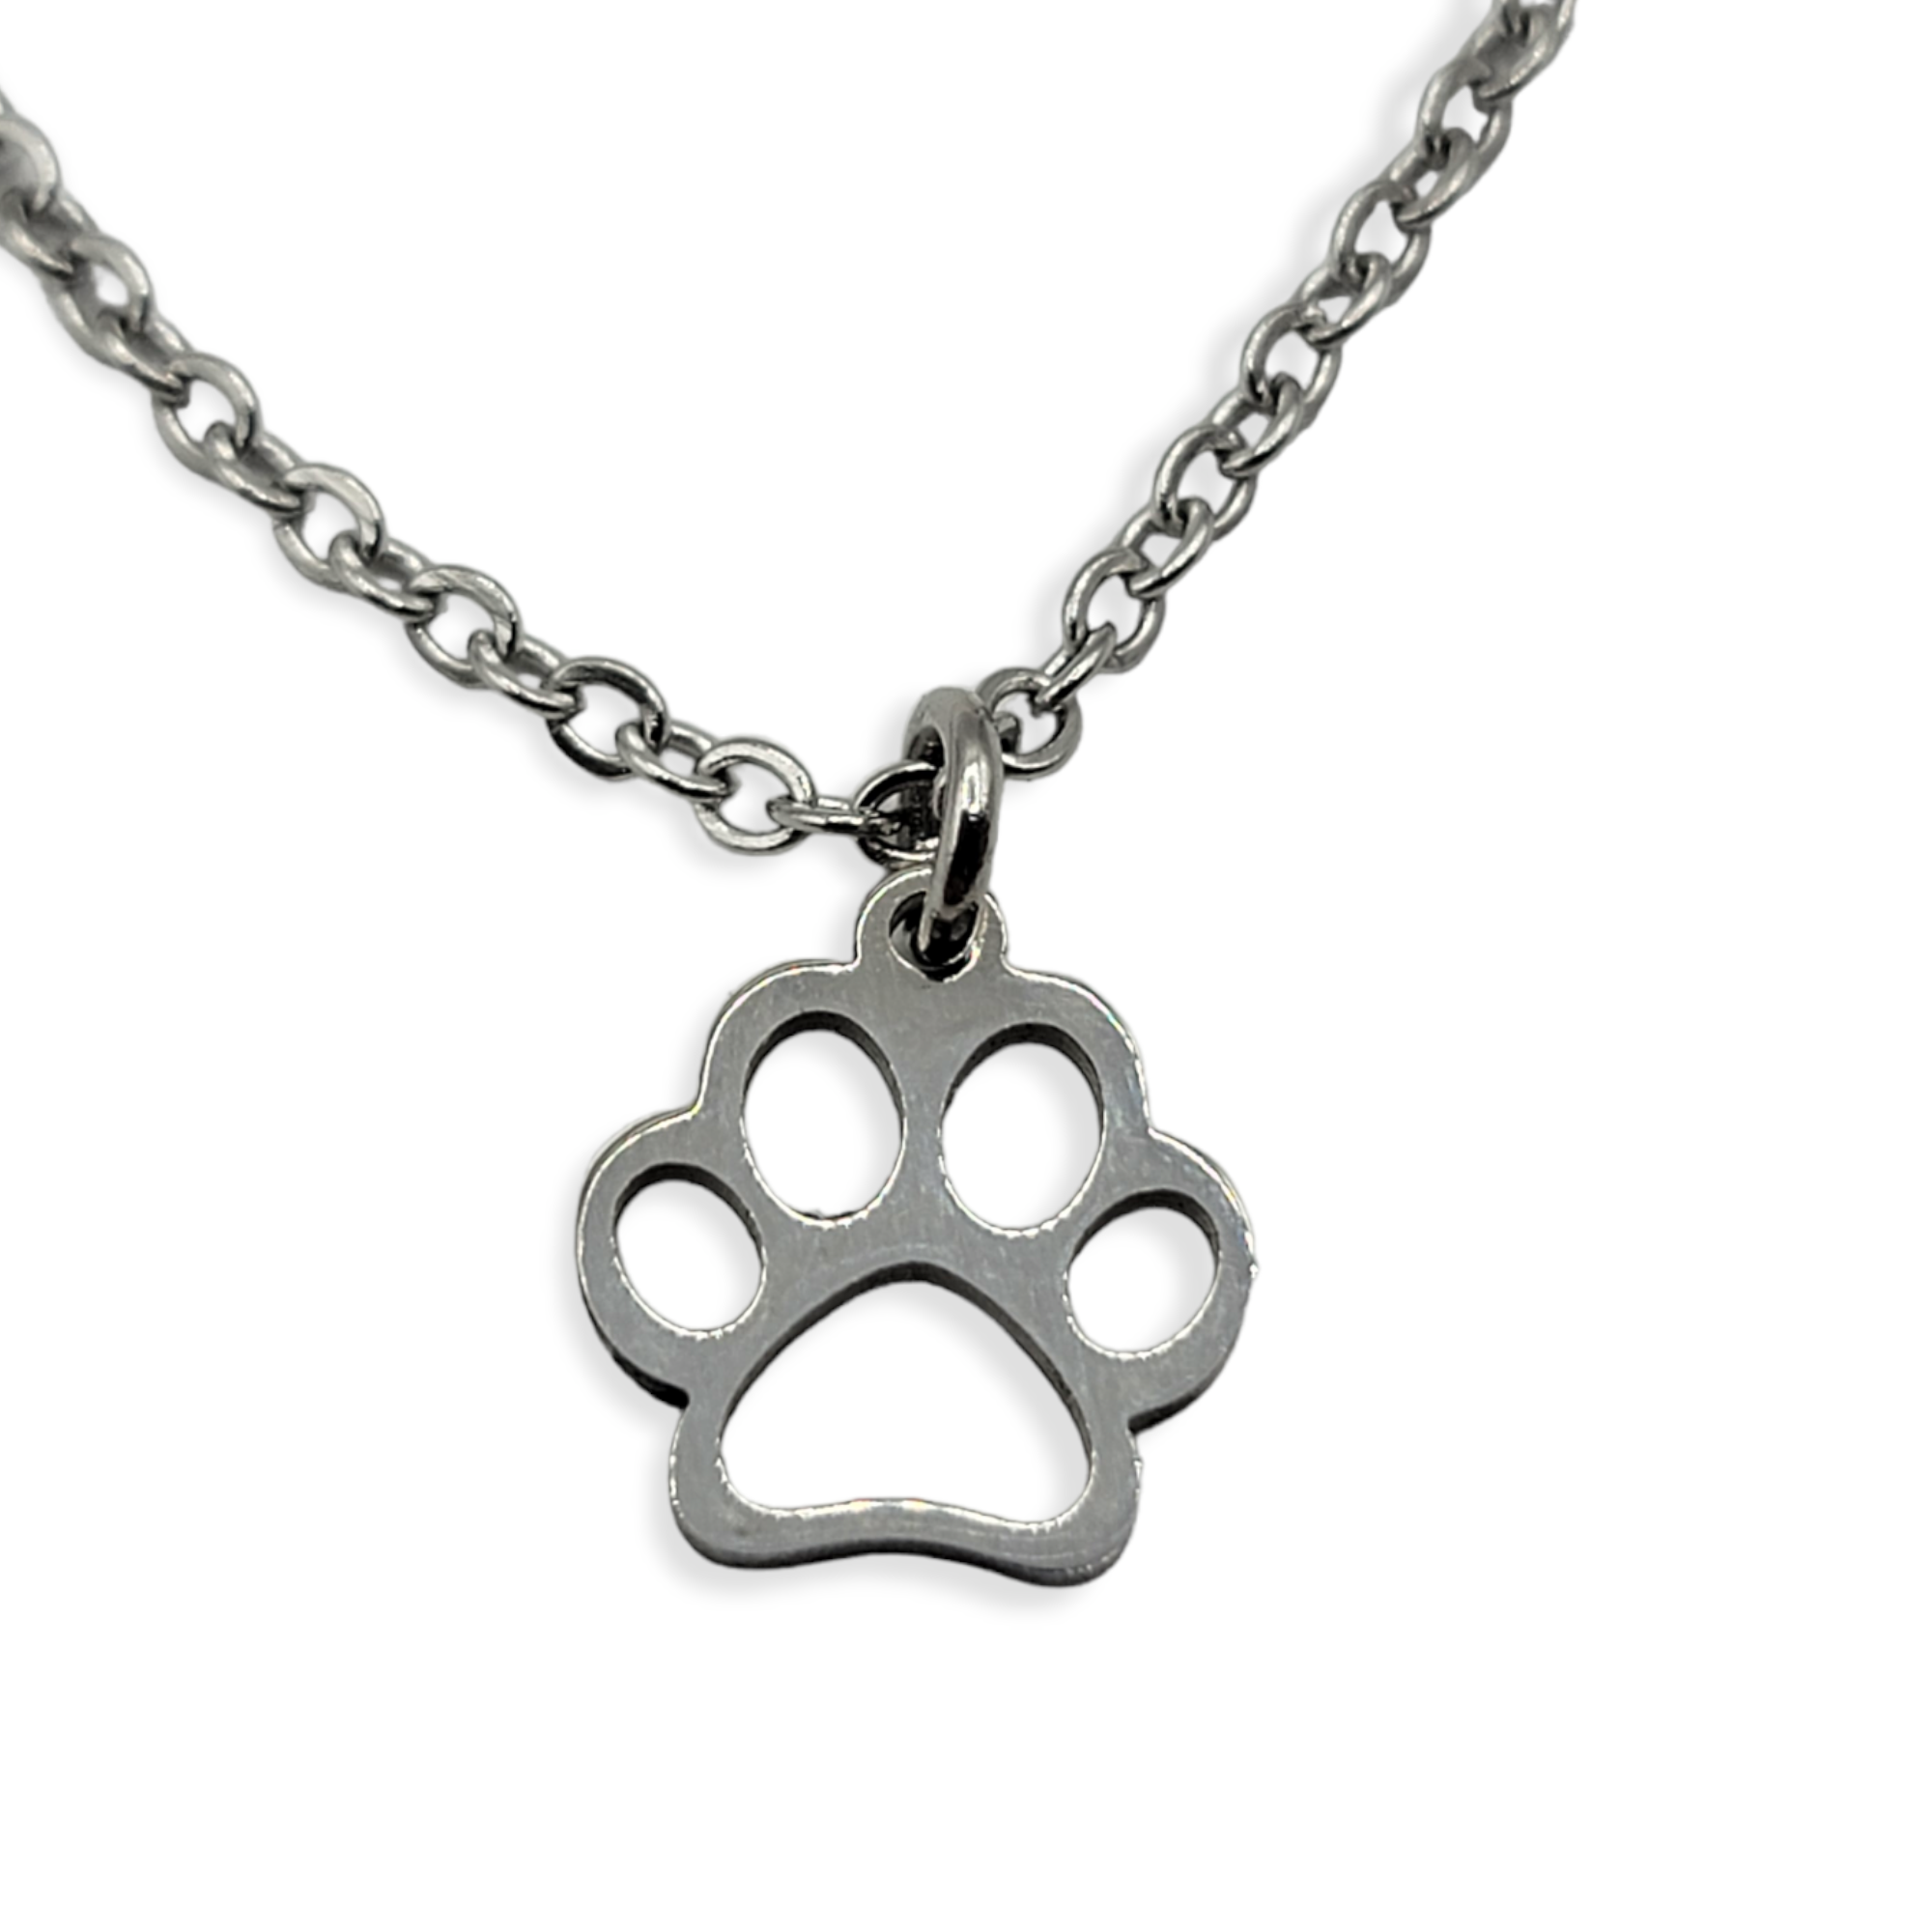 Paw Print Necklace -"Dog/cat Mom" Necklace with a message - CUSTOMIZE PACKAGE - Travelers Trade Post